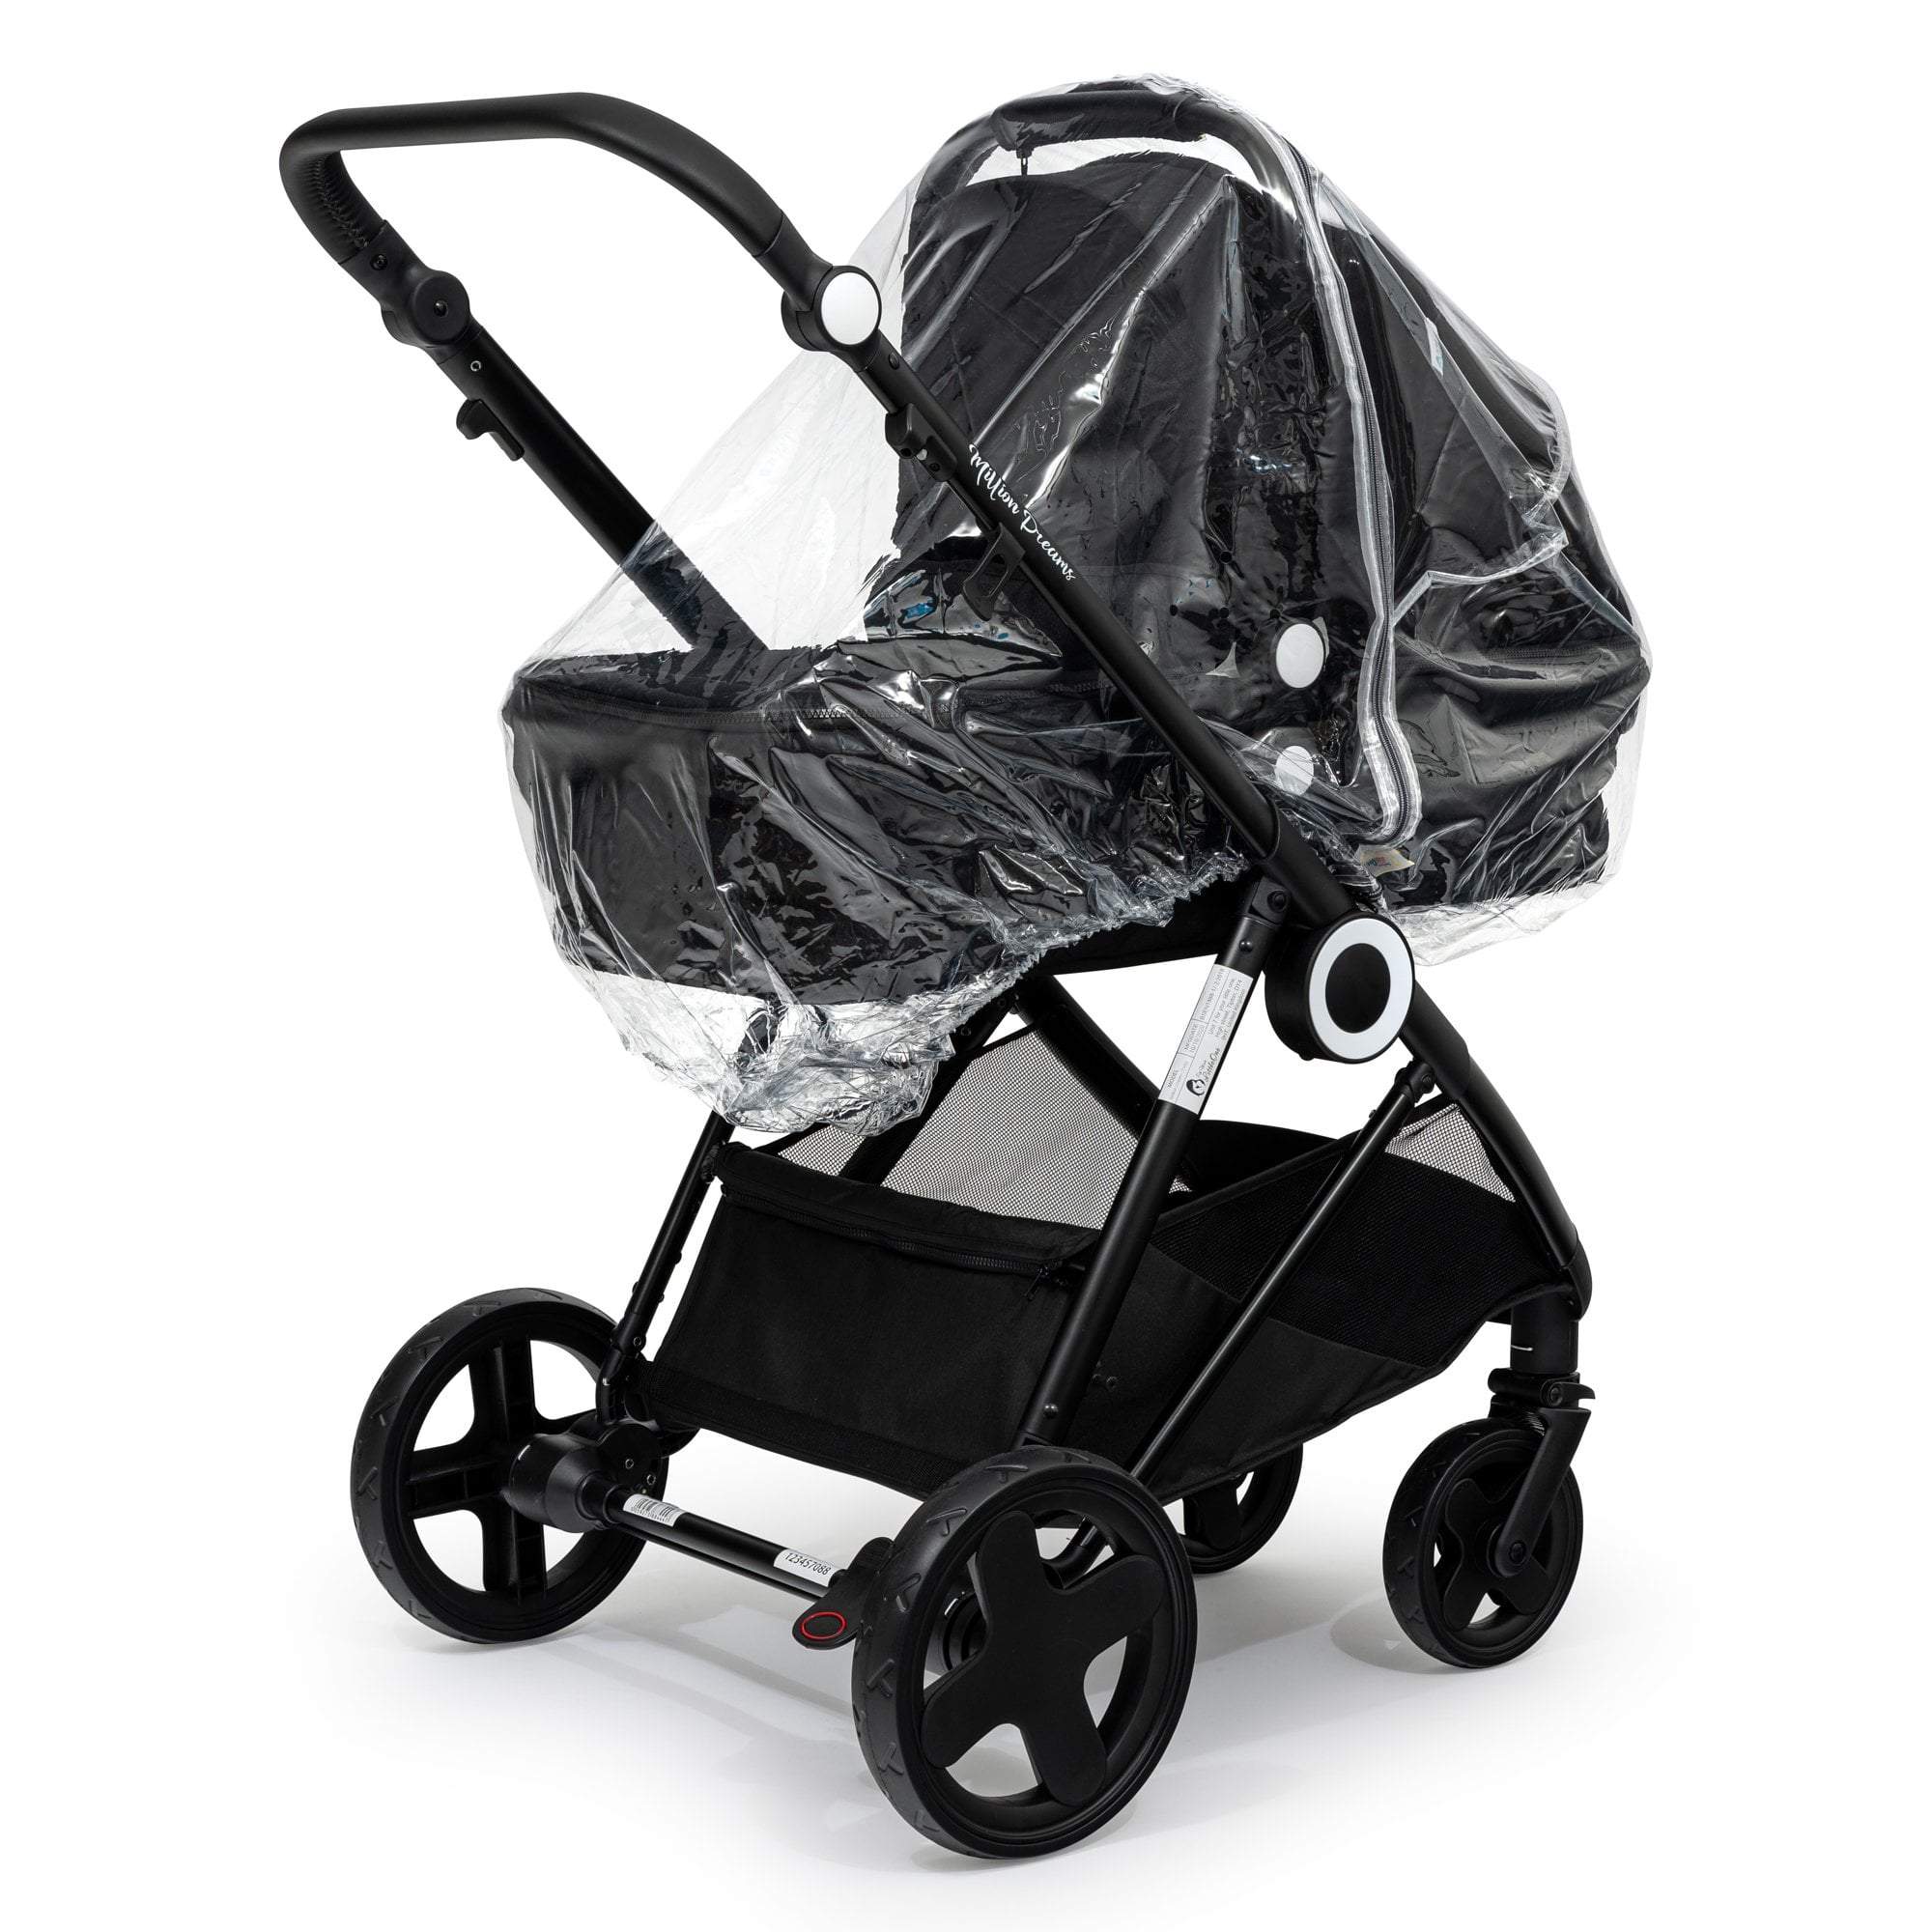 Carrycot Raincover Compatible With Venicci - Fits All Models - For Your Little One